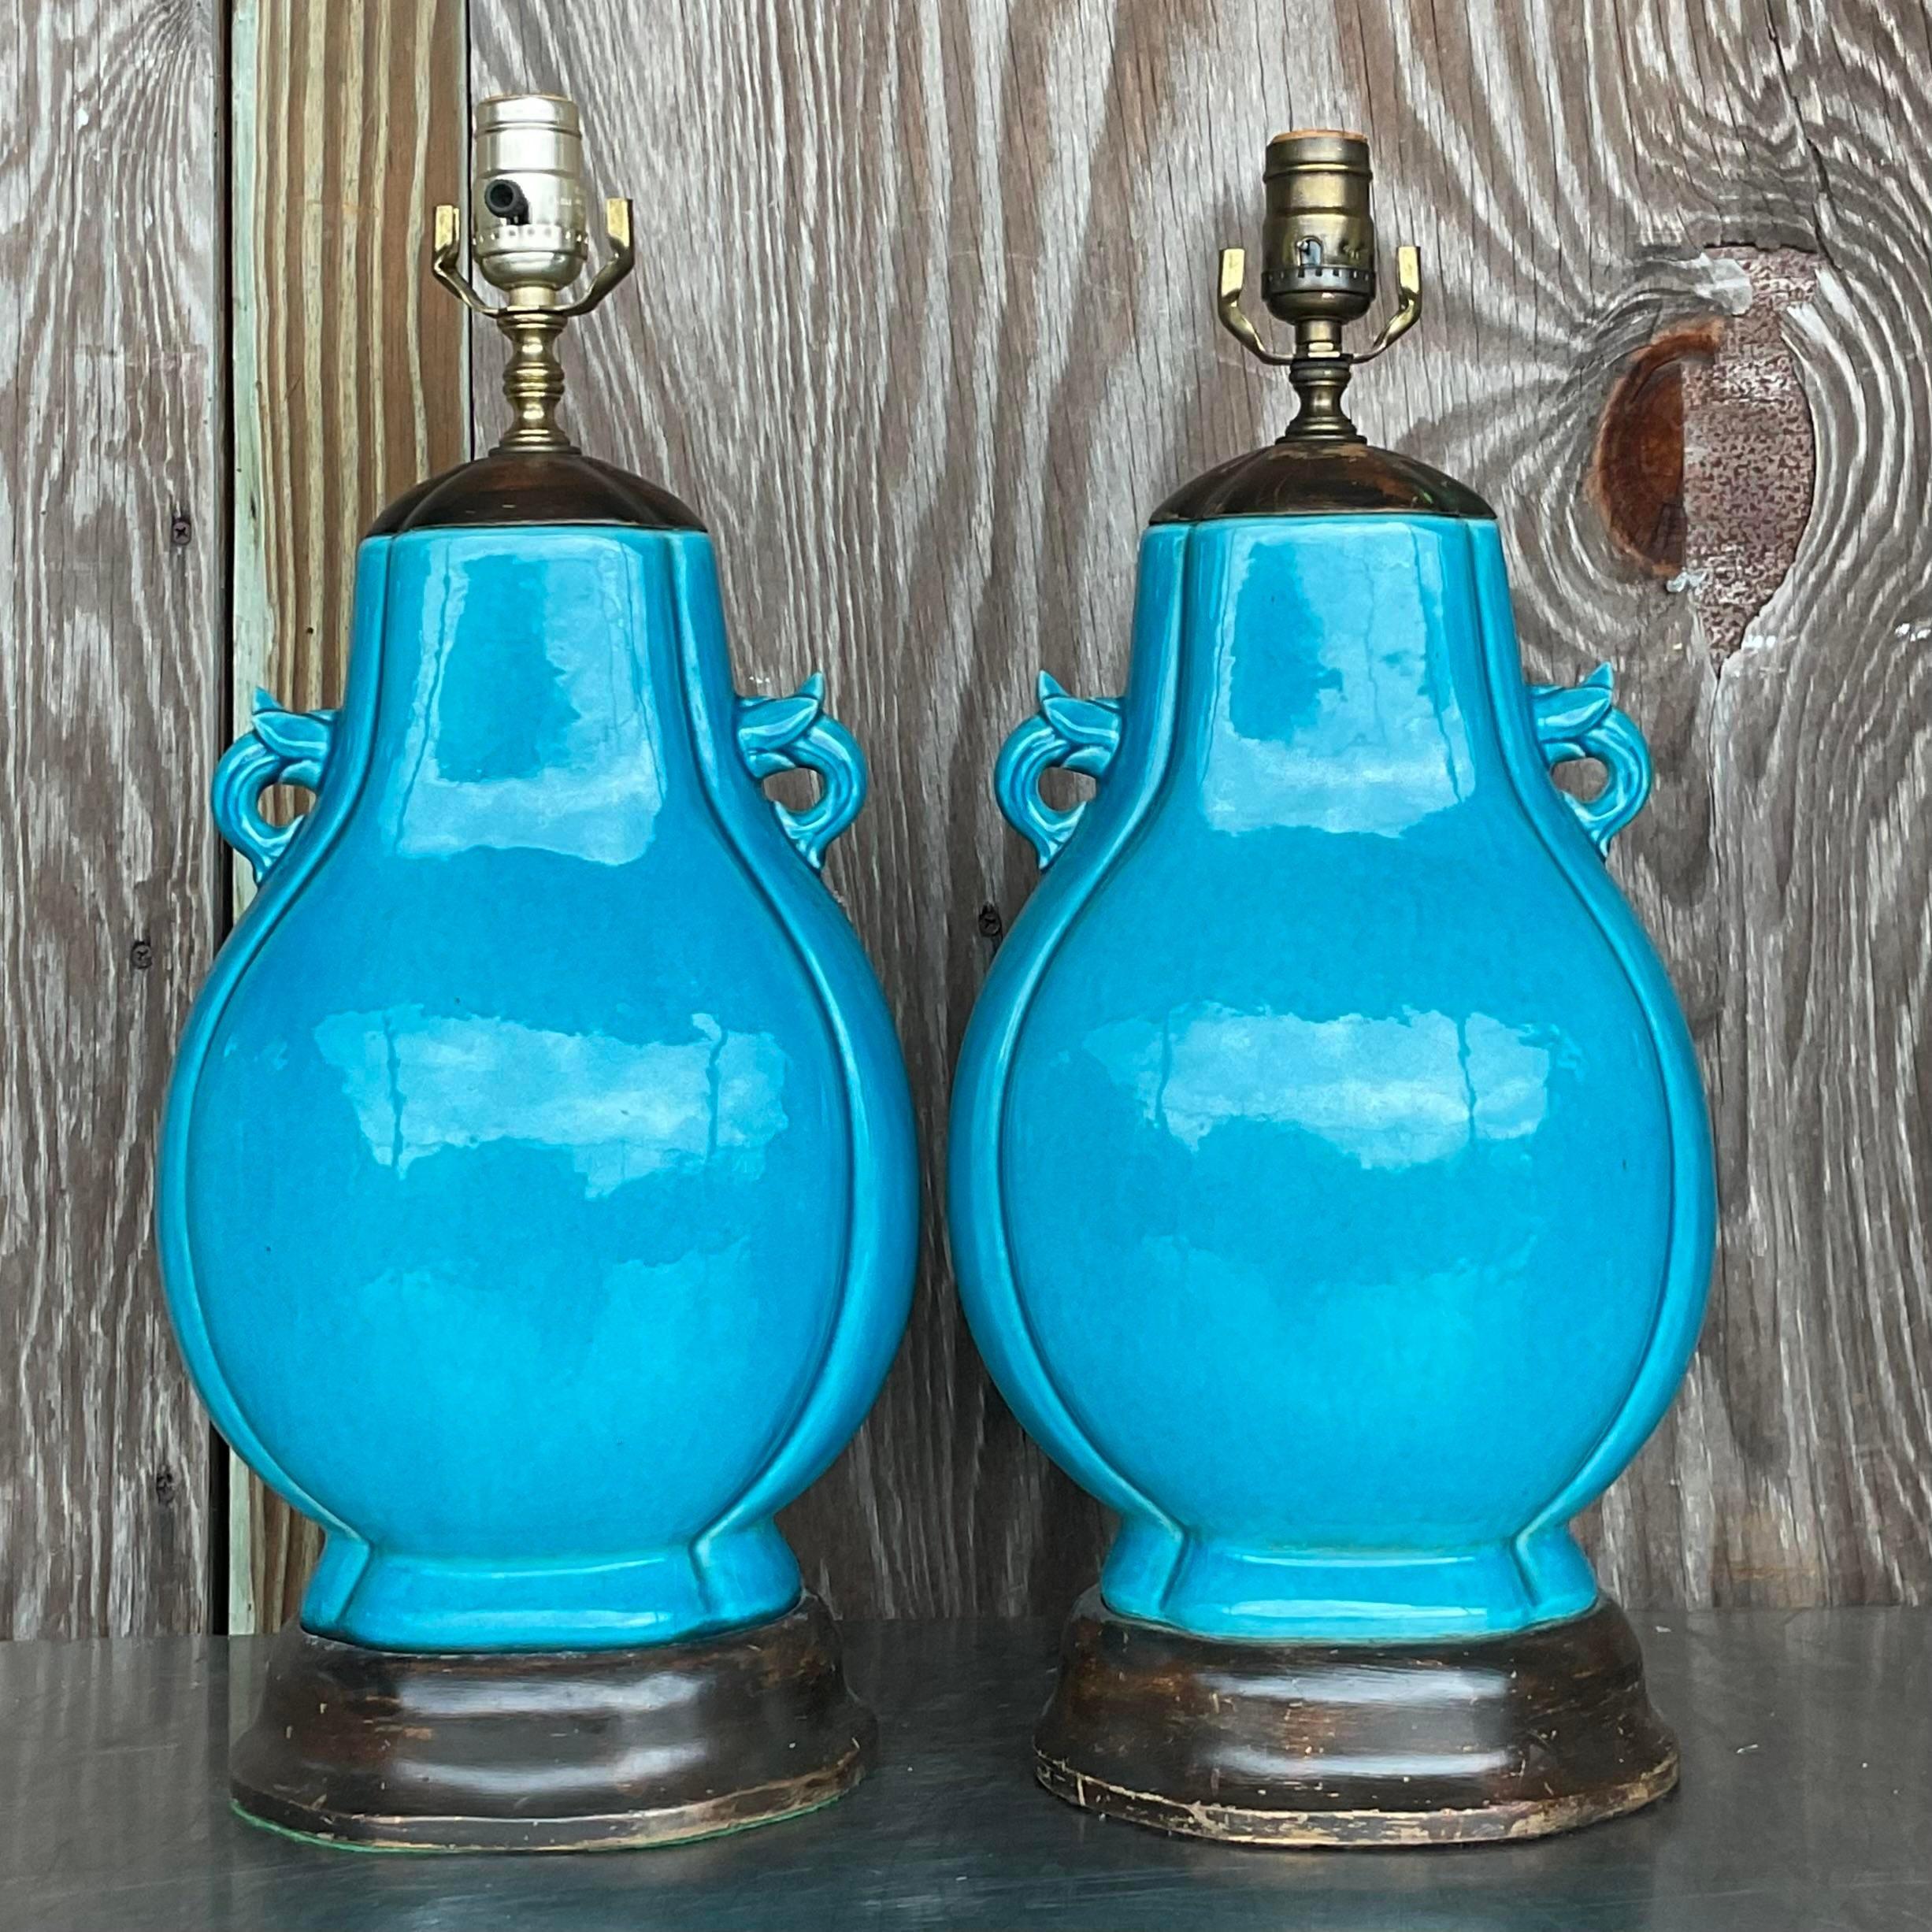 A spectacular pair of vintage Boho table lamps. A gorgeous bright turquoise blue in a glazed ceramic finish. Rest on ebonized wooden plinths. Acquired from a Palm Beach estate